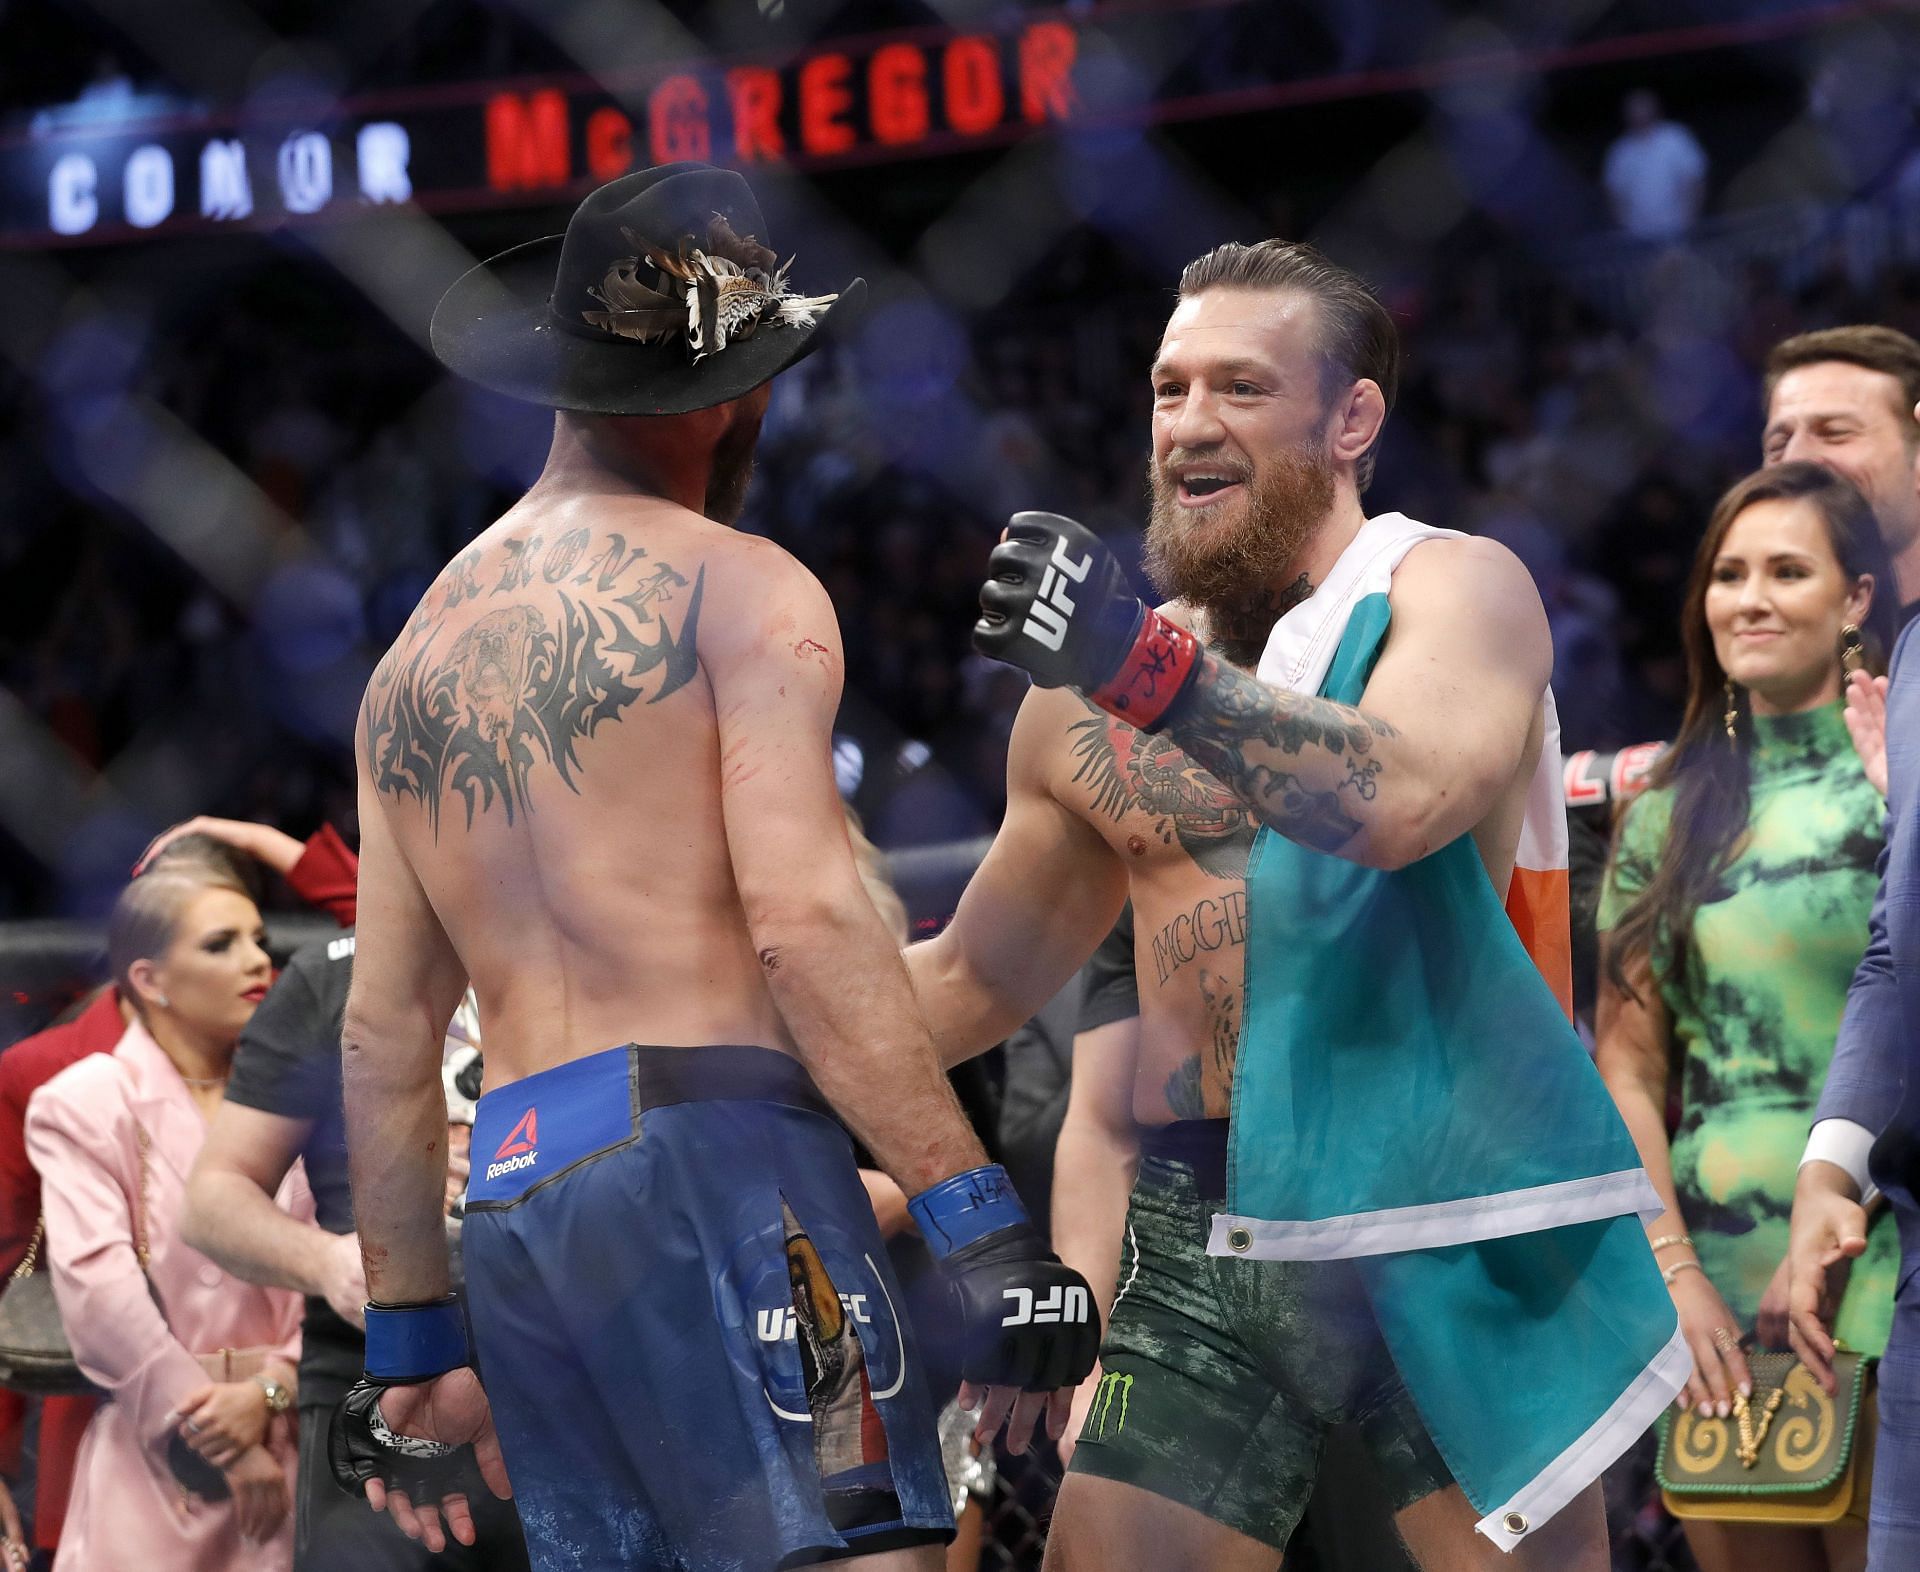 McGregor defeated Cowboy in front of 19,040 fans